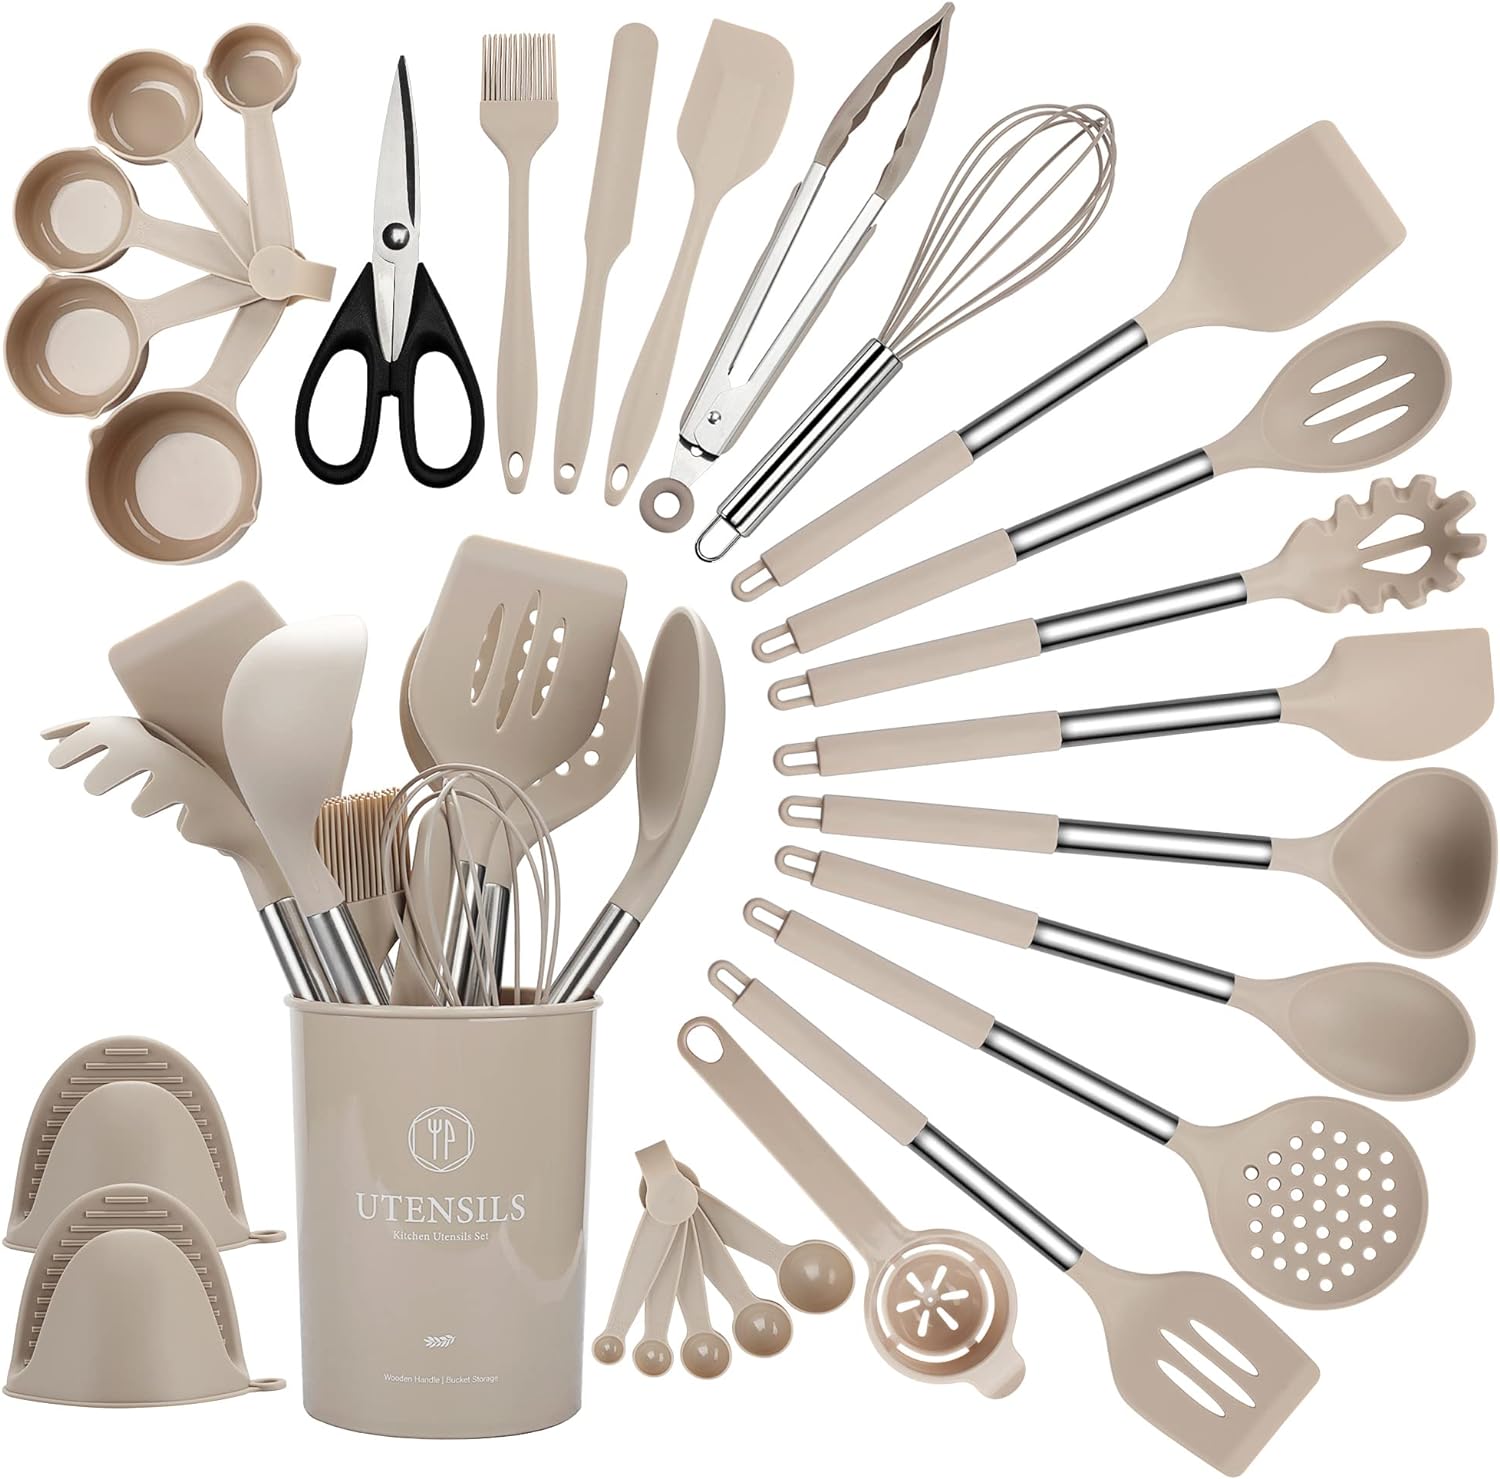 QMVESS Silicone Kitchen Utensil Set, 28 Pcs Non-Stick Cooking Utensils Set with Holder, Tongs, Spatula, Whisk, Measuring Cups and Spoons Set with Stainless Steel Handle Kitchen Gadgets (Khaki)